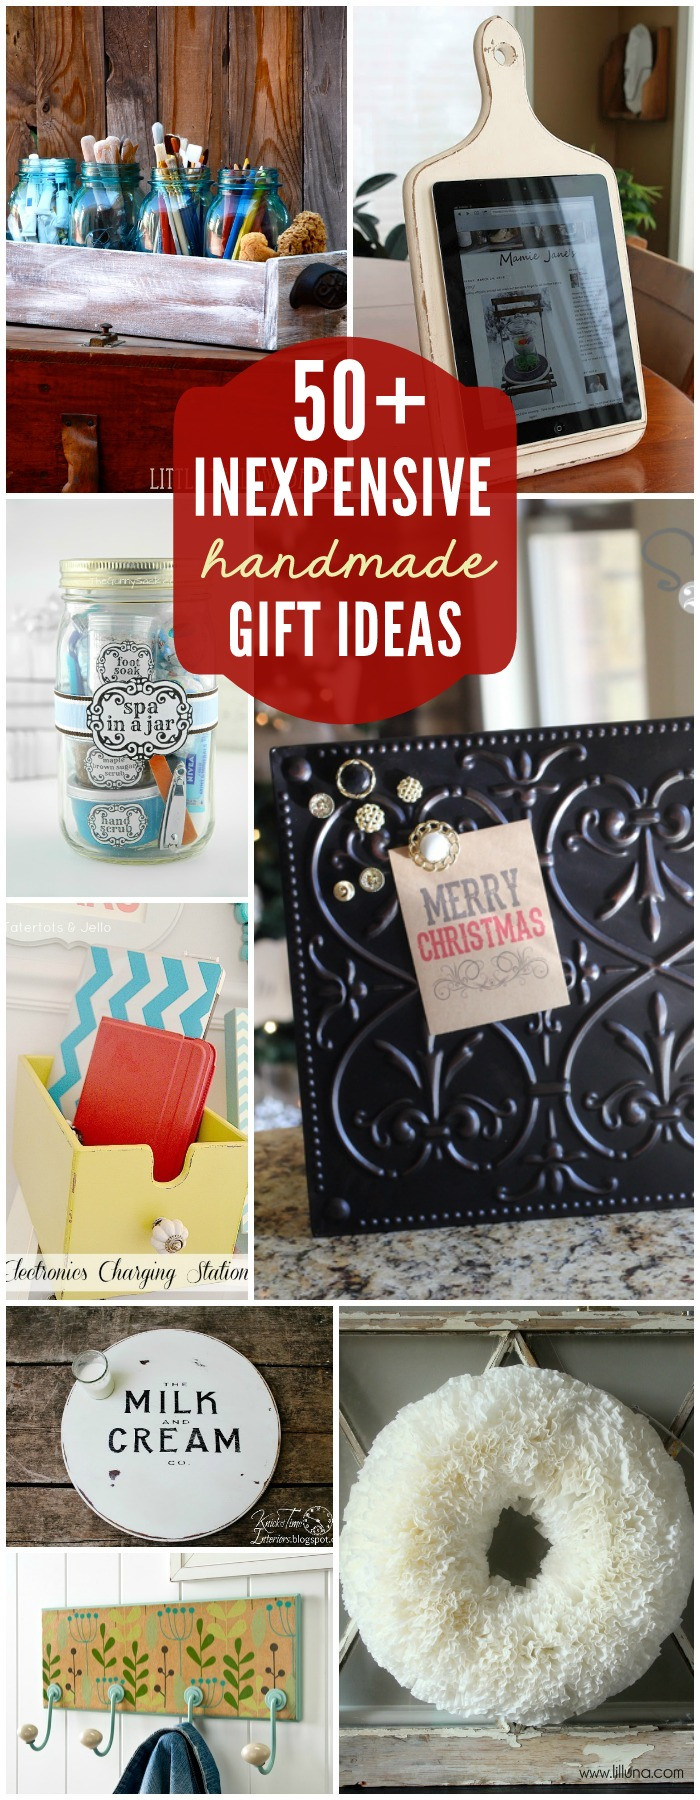 Easy Cheap DIY Christmas Gifts
 75 Gift Ideas under $5